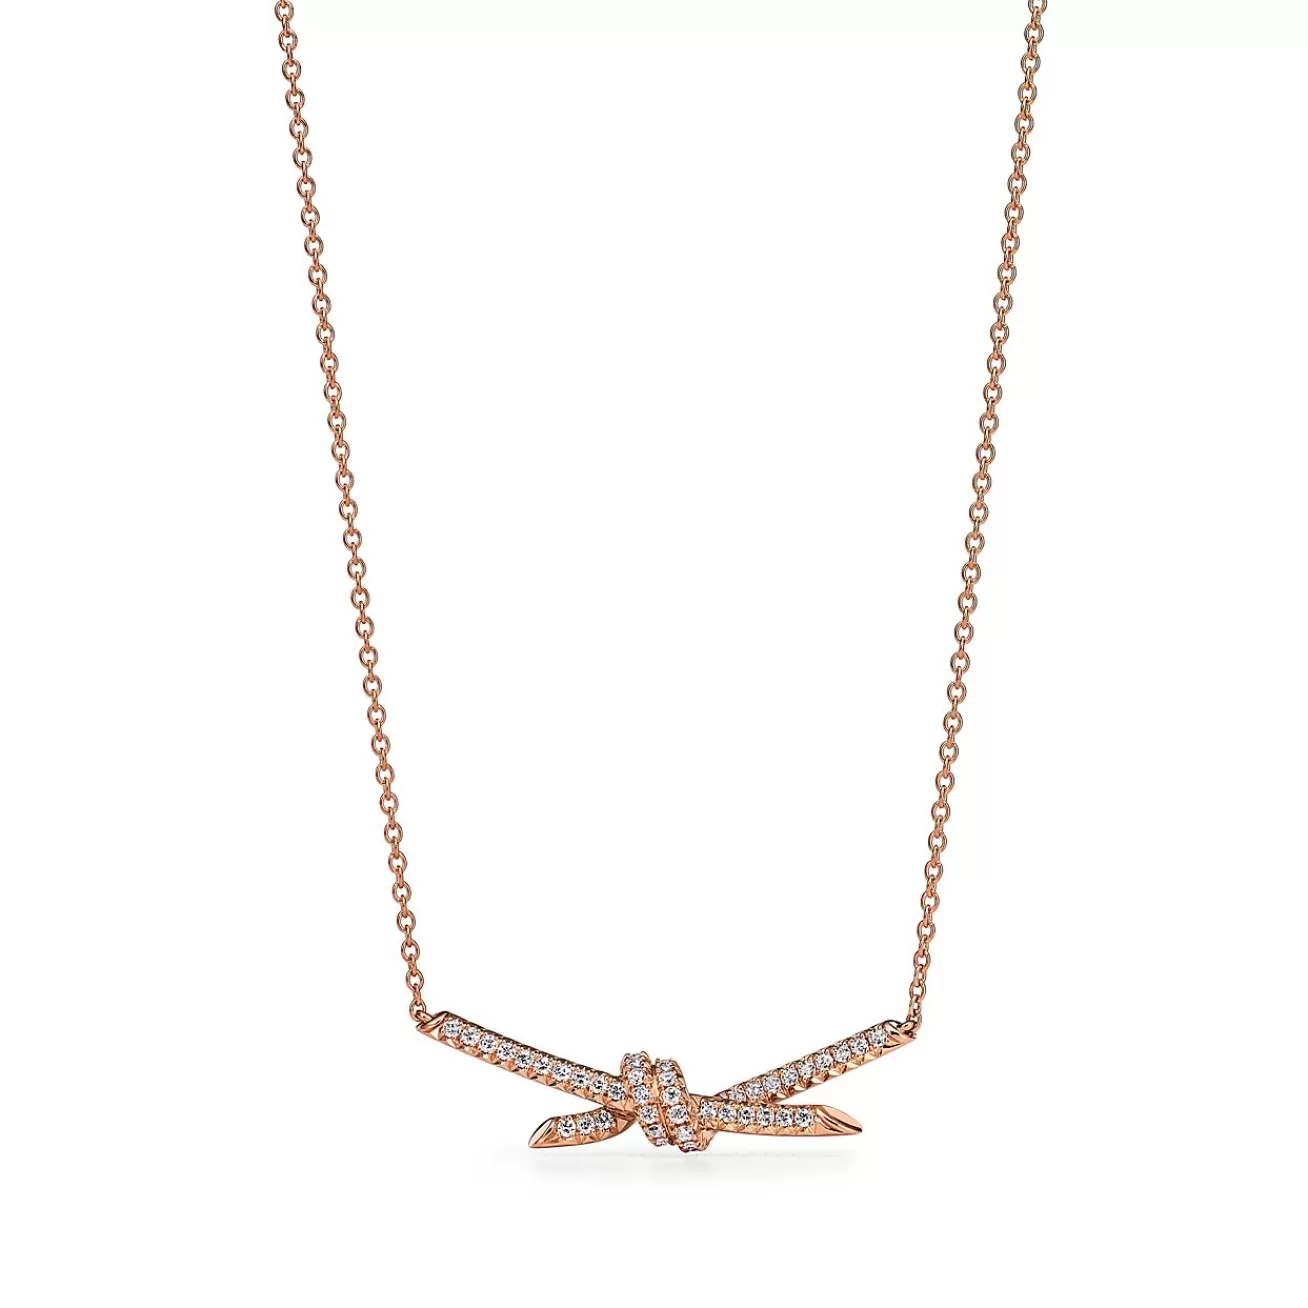 Tiffany & Co. Tiffany Knot Pendant in Rose Gold with Diamonds | ^ Necklaces & Pendants | Rose Gold Jewelry